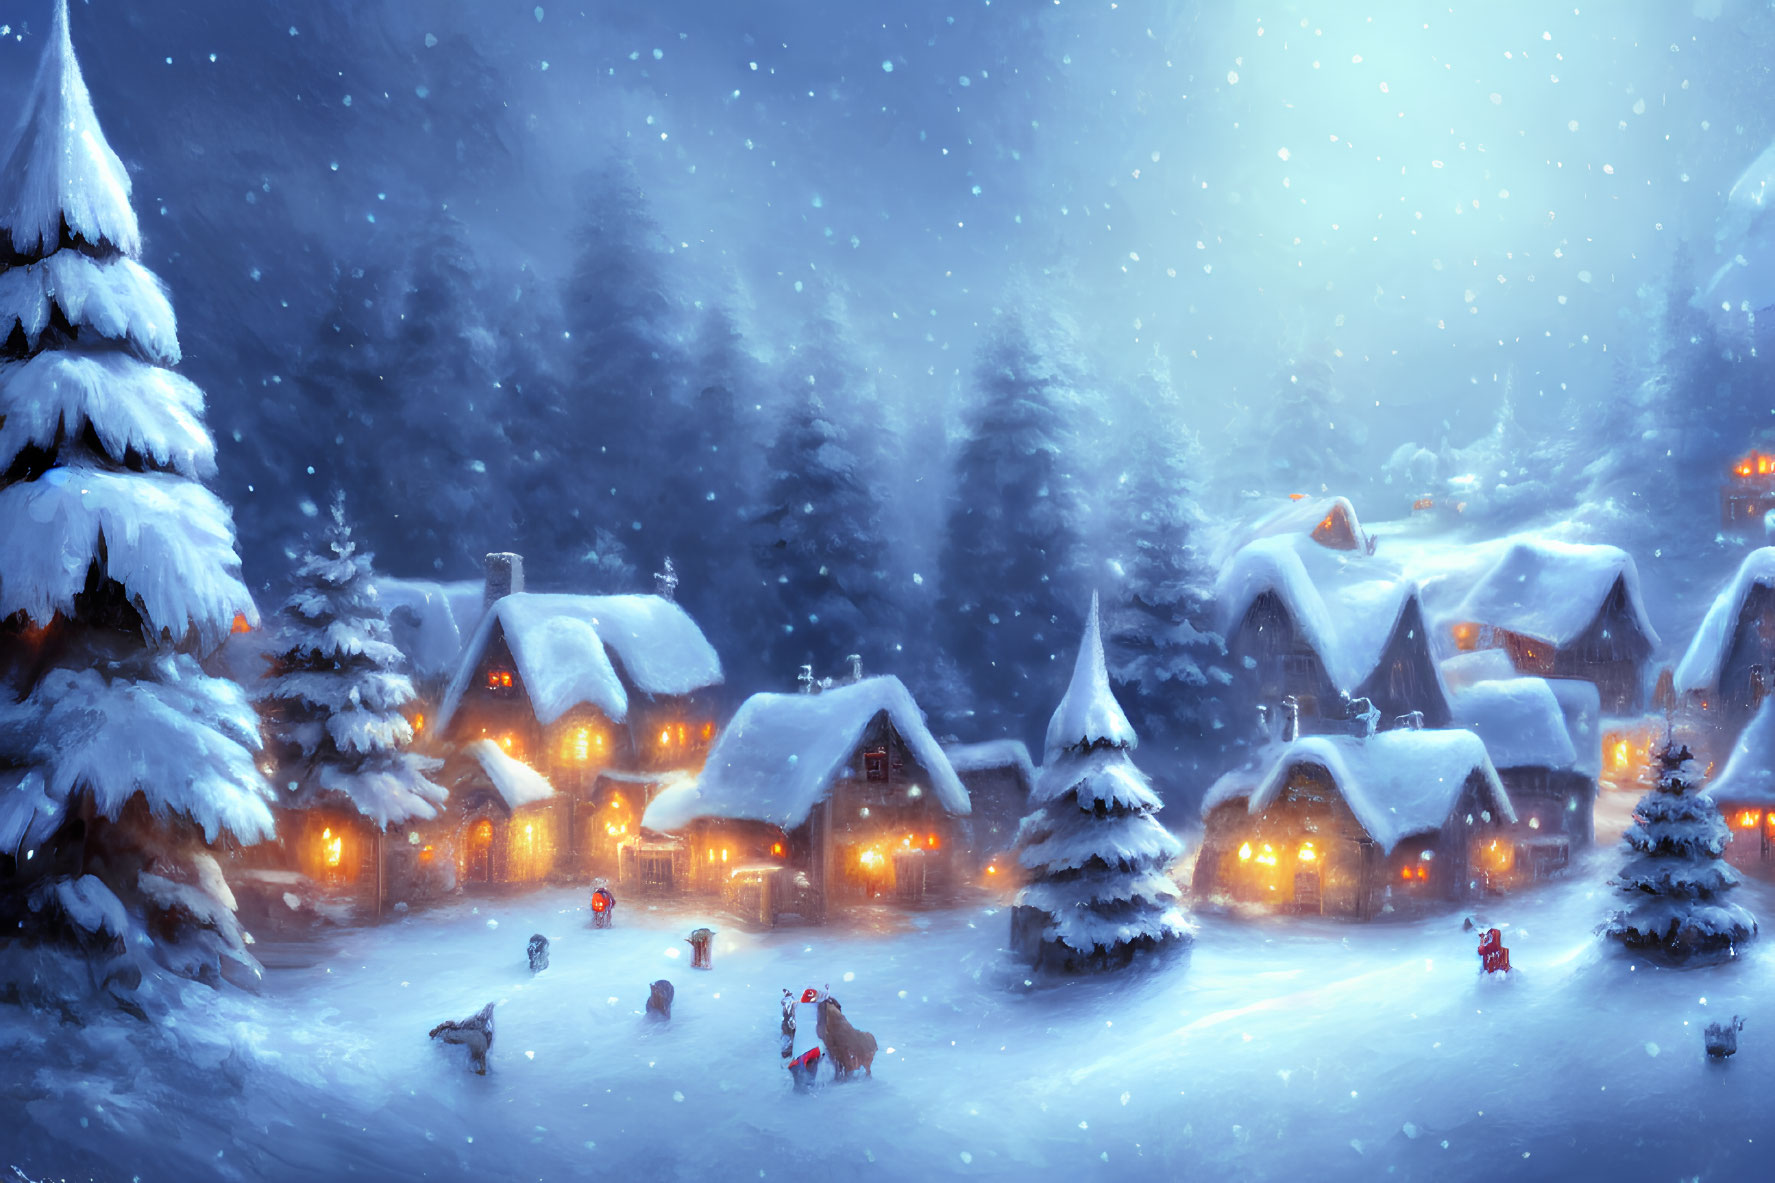 Snow-covered winter village scene at twilight with glowing windows and falling snowflakes